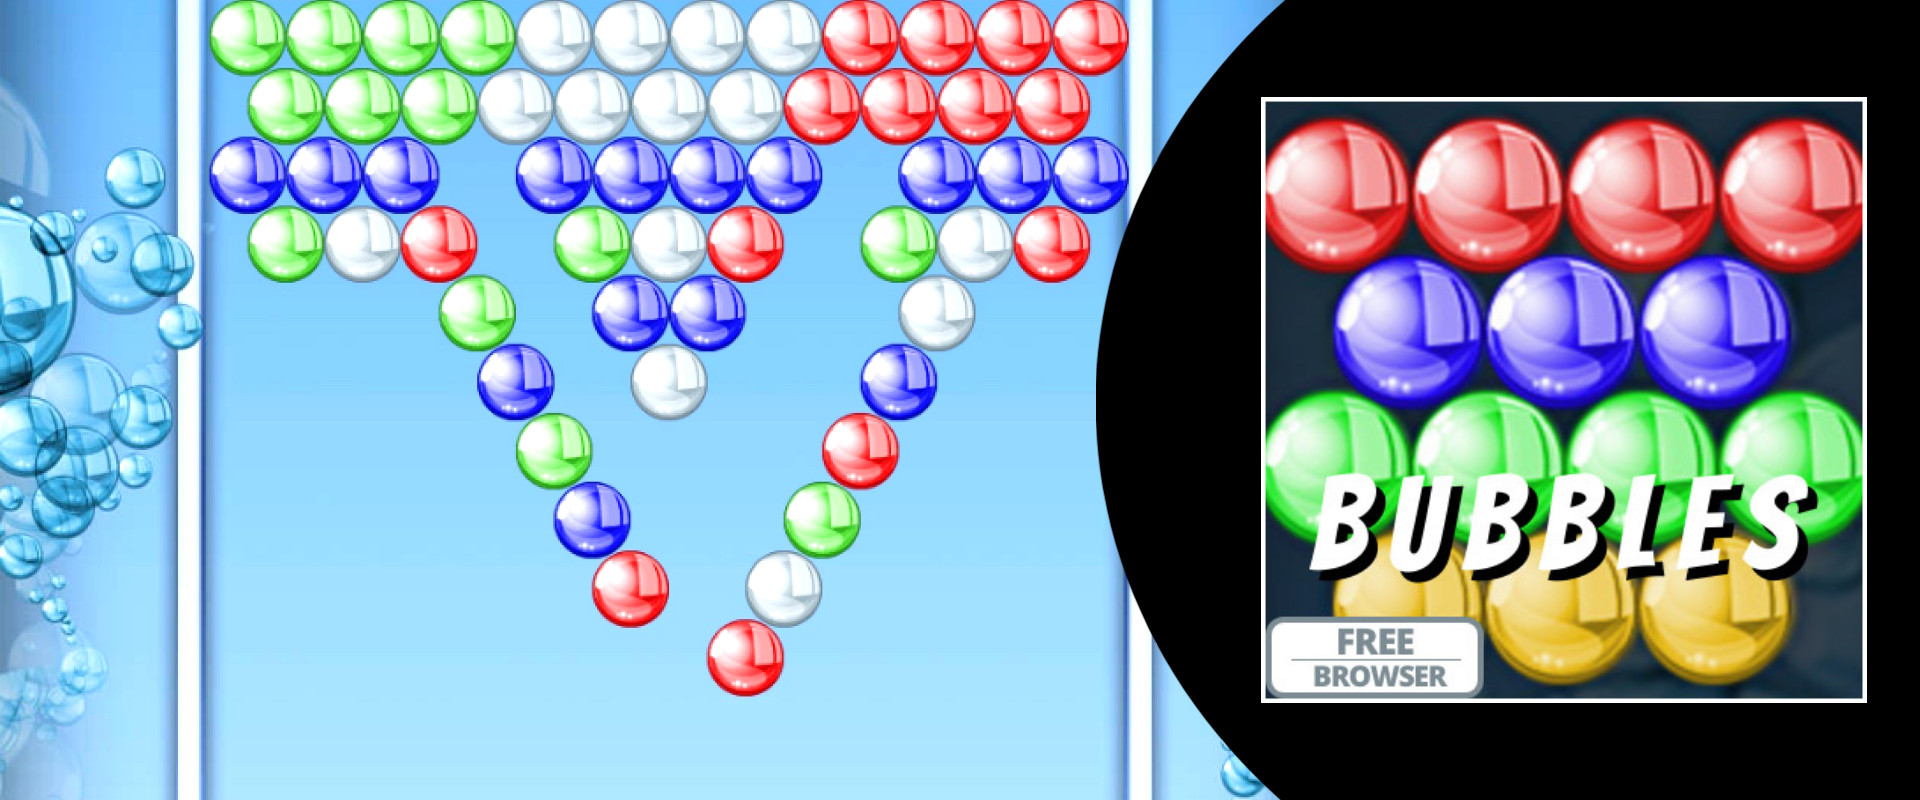 Play Free Browser Game Bubble Rush on GAWOONI.GAMES!